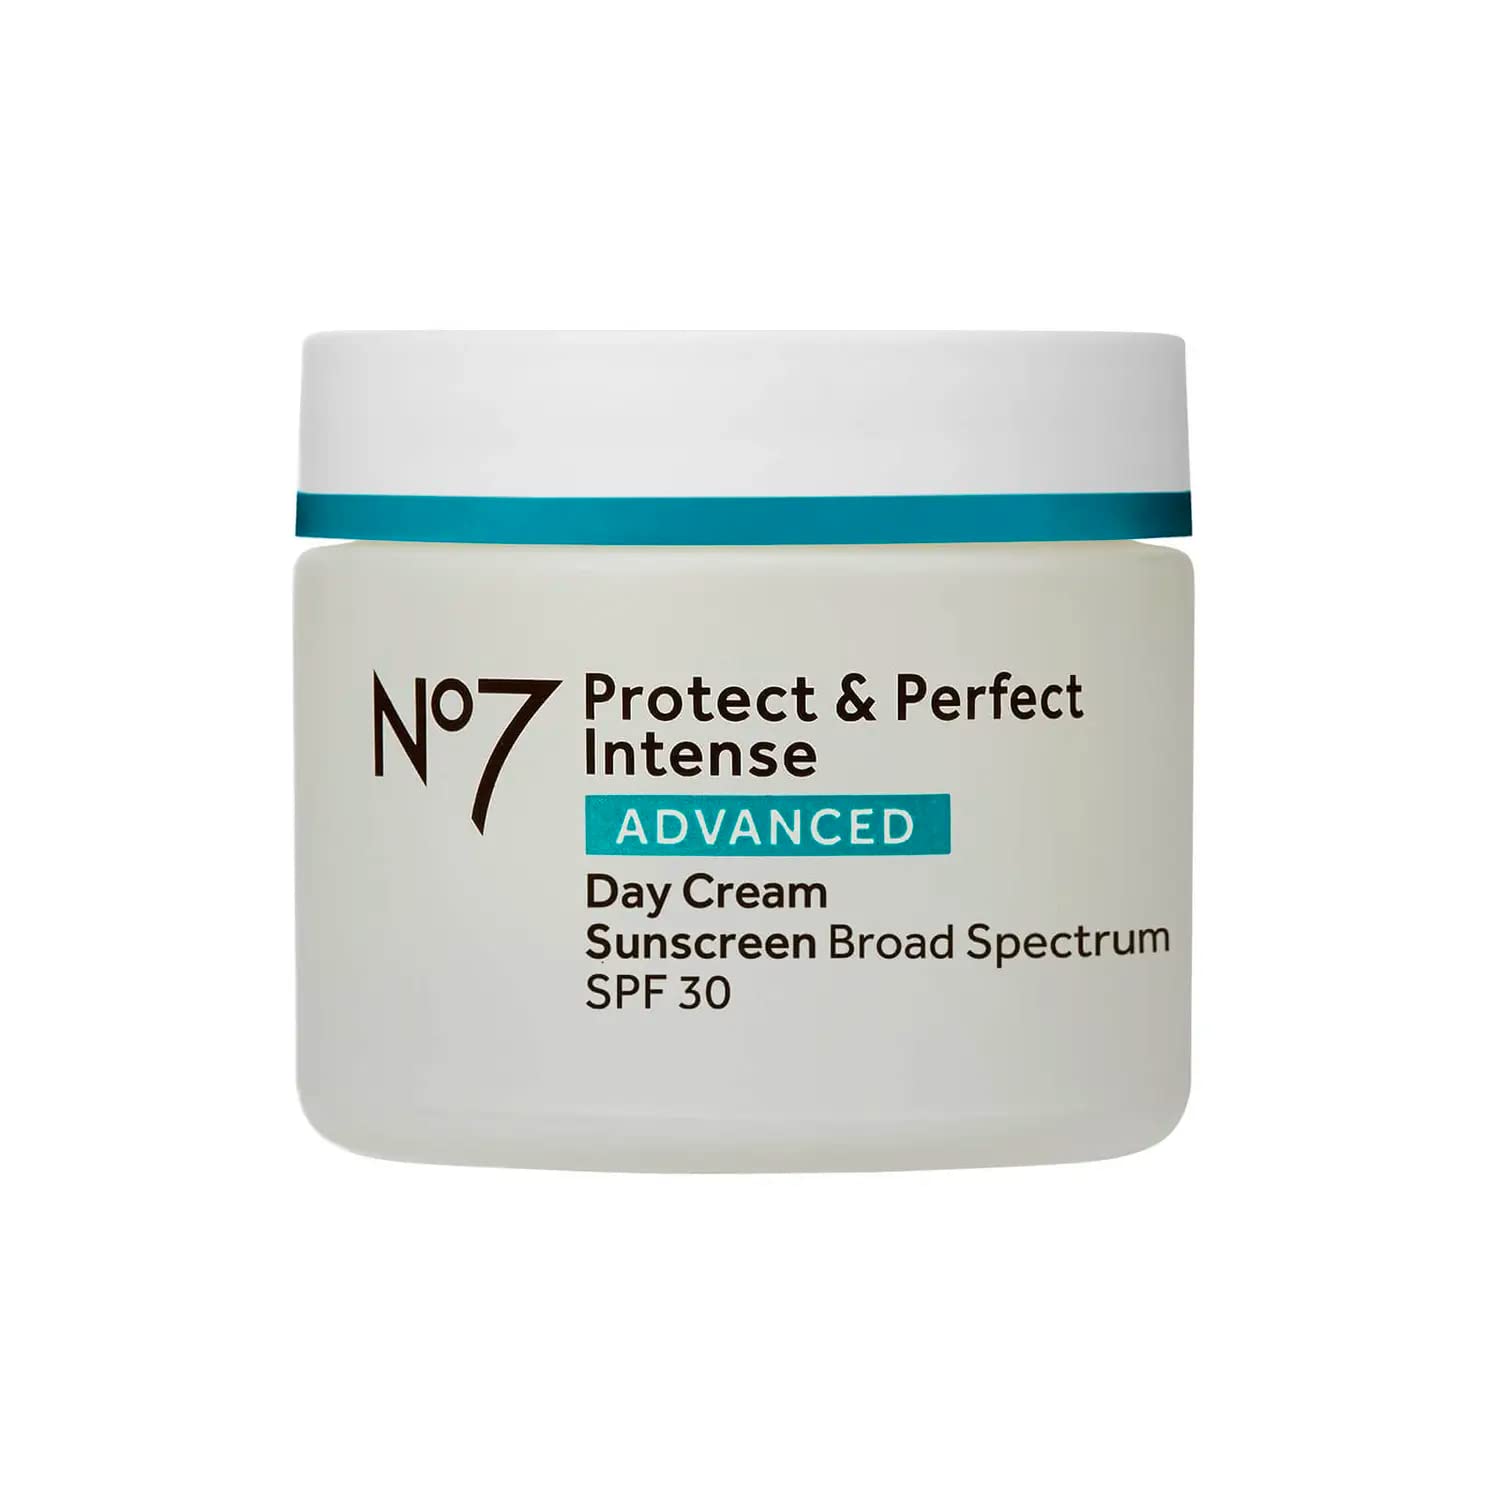 No7 Protect & Perfect Intense Advanced Day Cream SPF 30 - Anti-Aging Facial Moisturizer with Anti-Wrinkle Technology - Hydrating Hyaluronic Acid Cream for Radiant Youthful Skin (50)